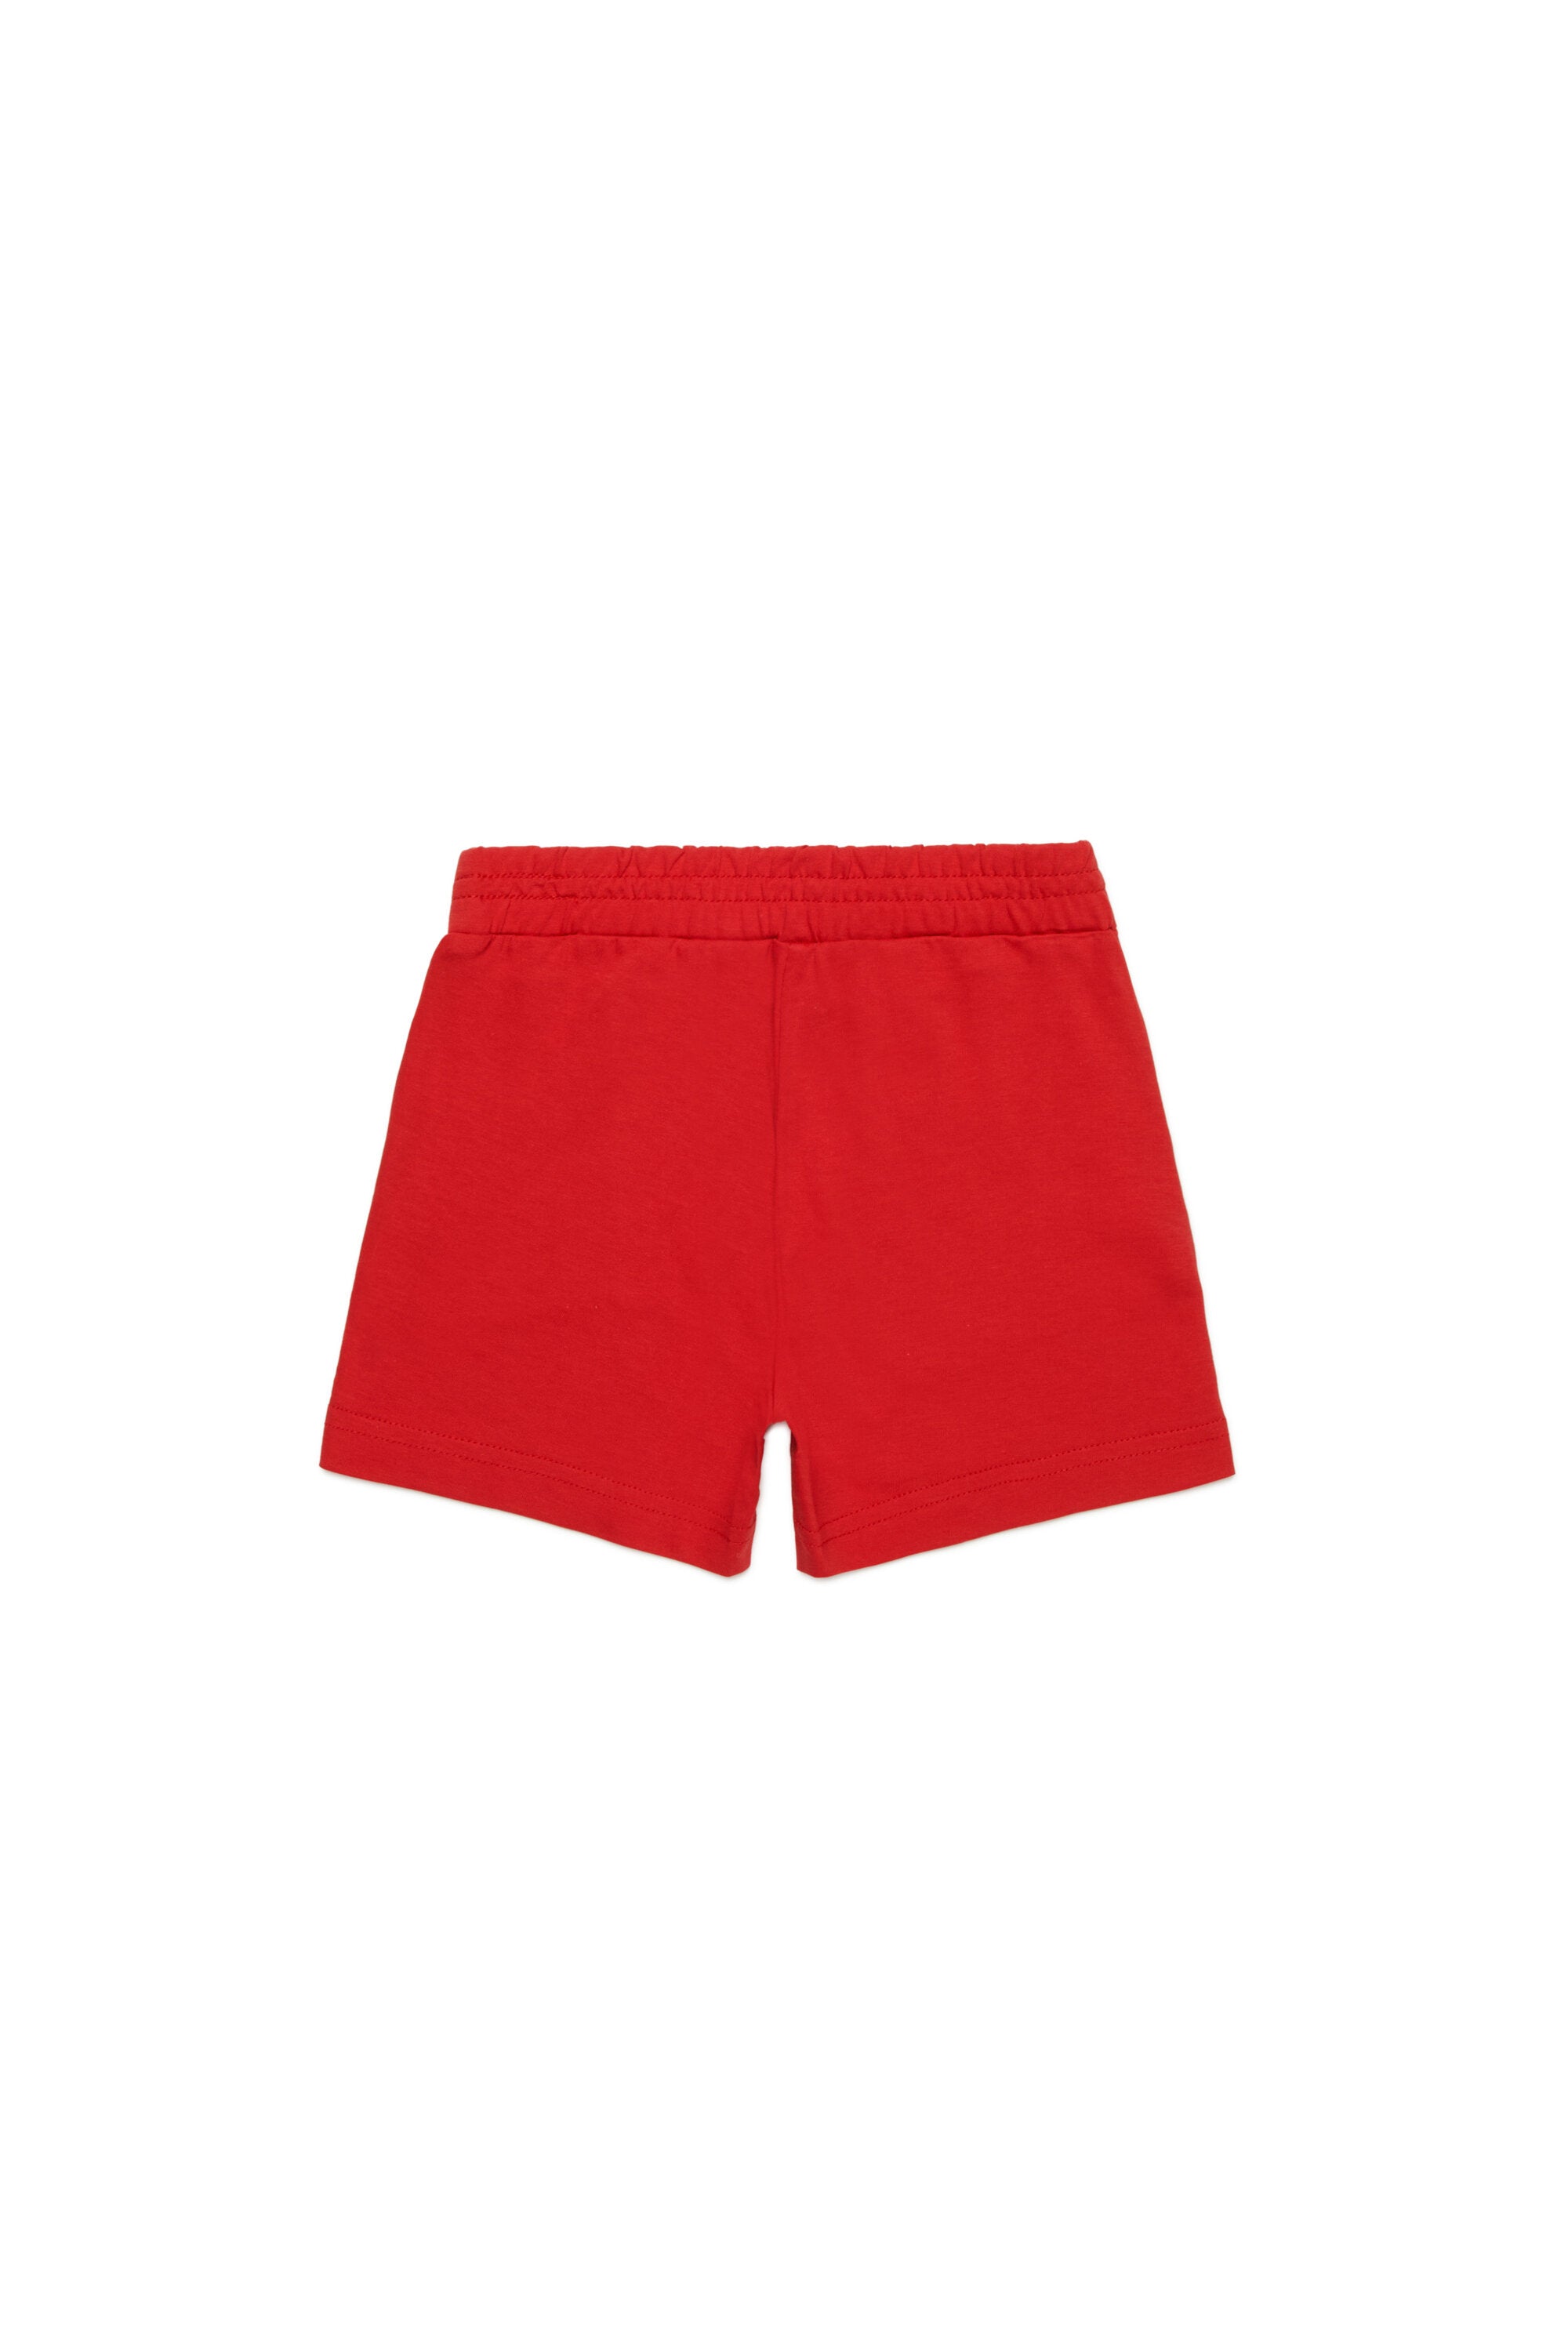 Cotton jersey branded shorts